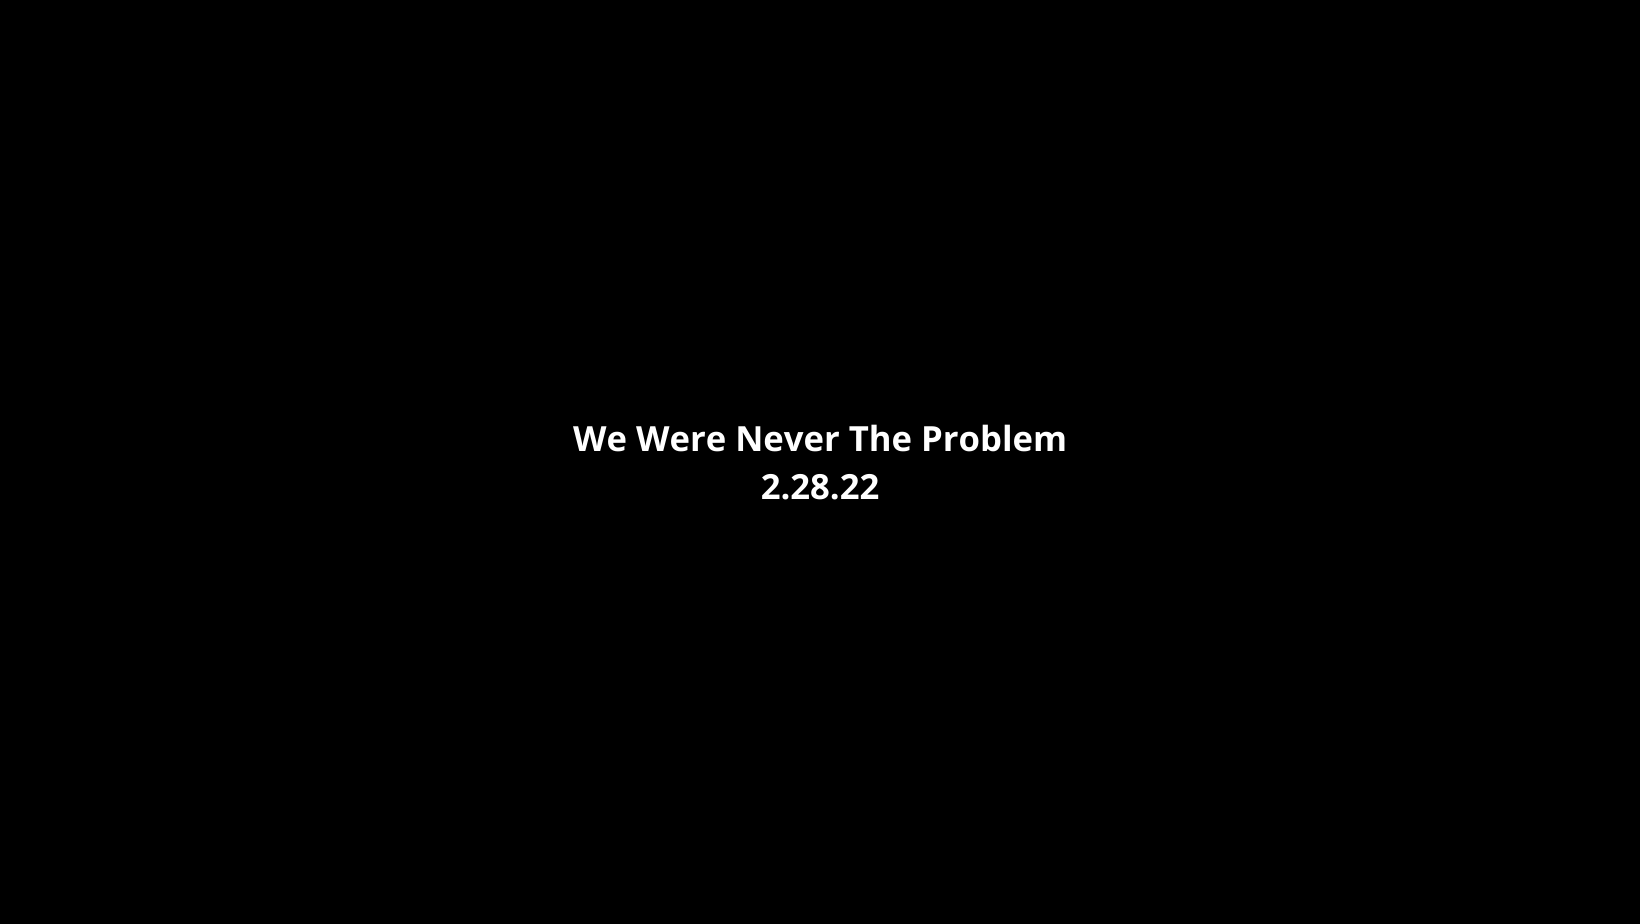 We Were Never The Problem